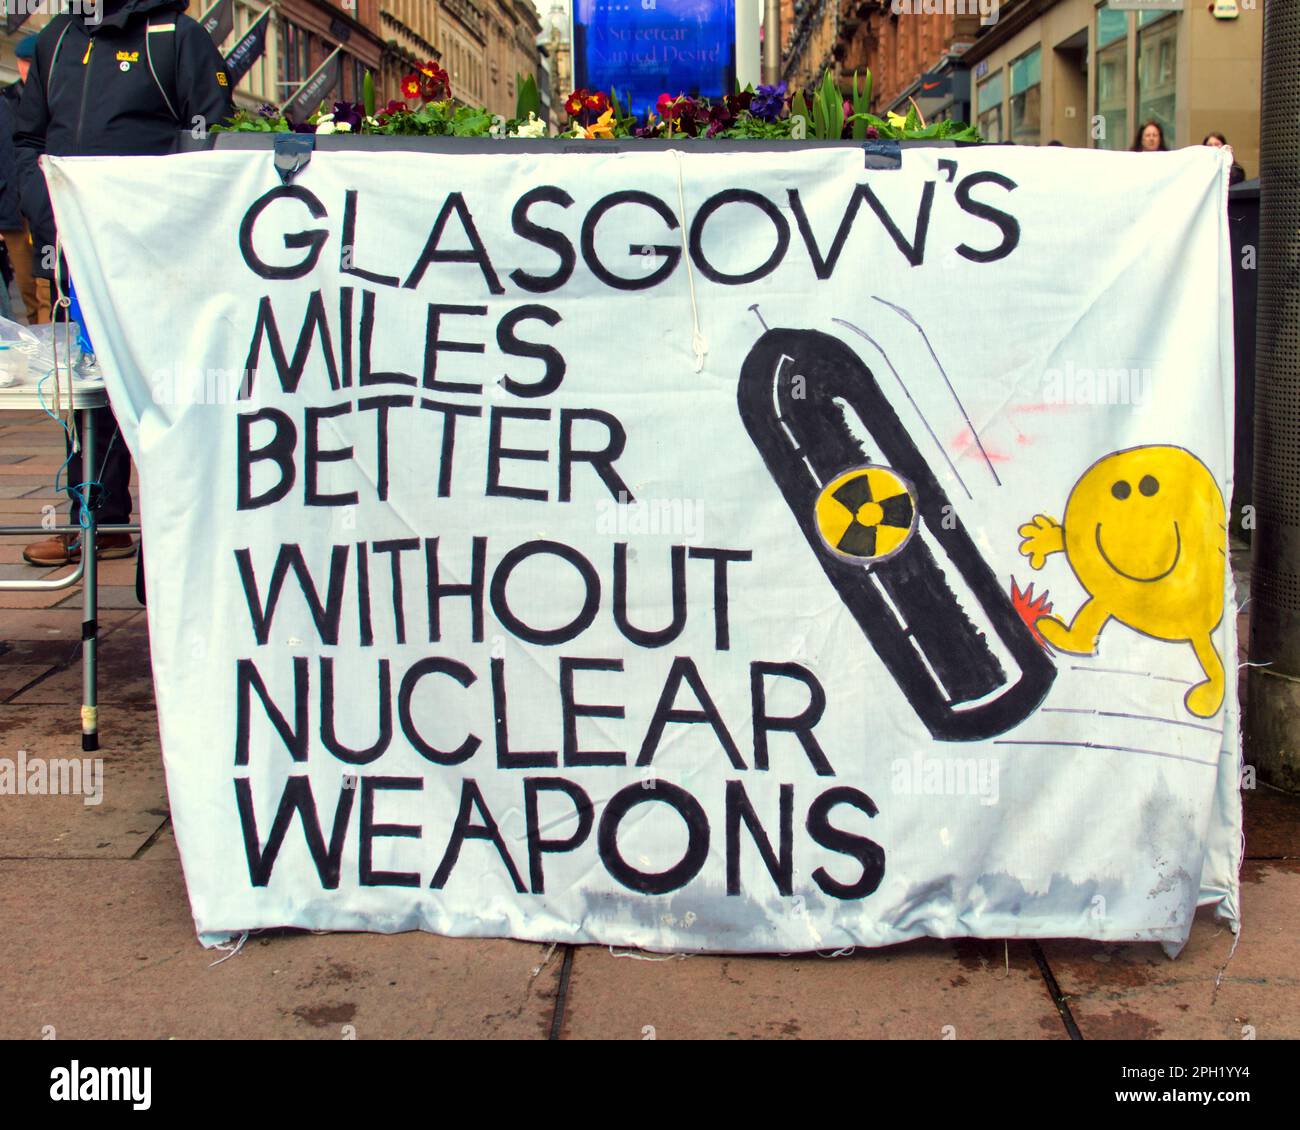 Glasgow CND on sauchiehall street  nuclear free banners nae nukes and Glasgow is miles better without nuclear weapons Stock Photo